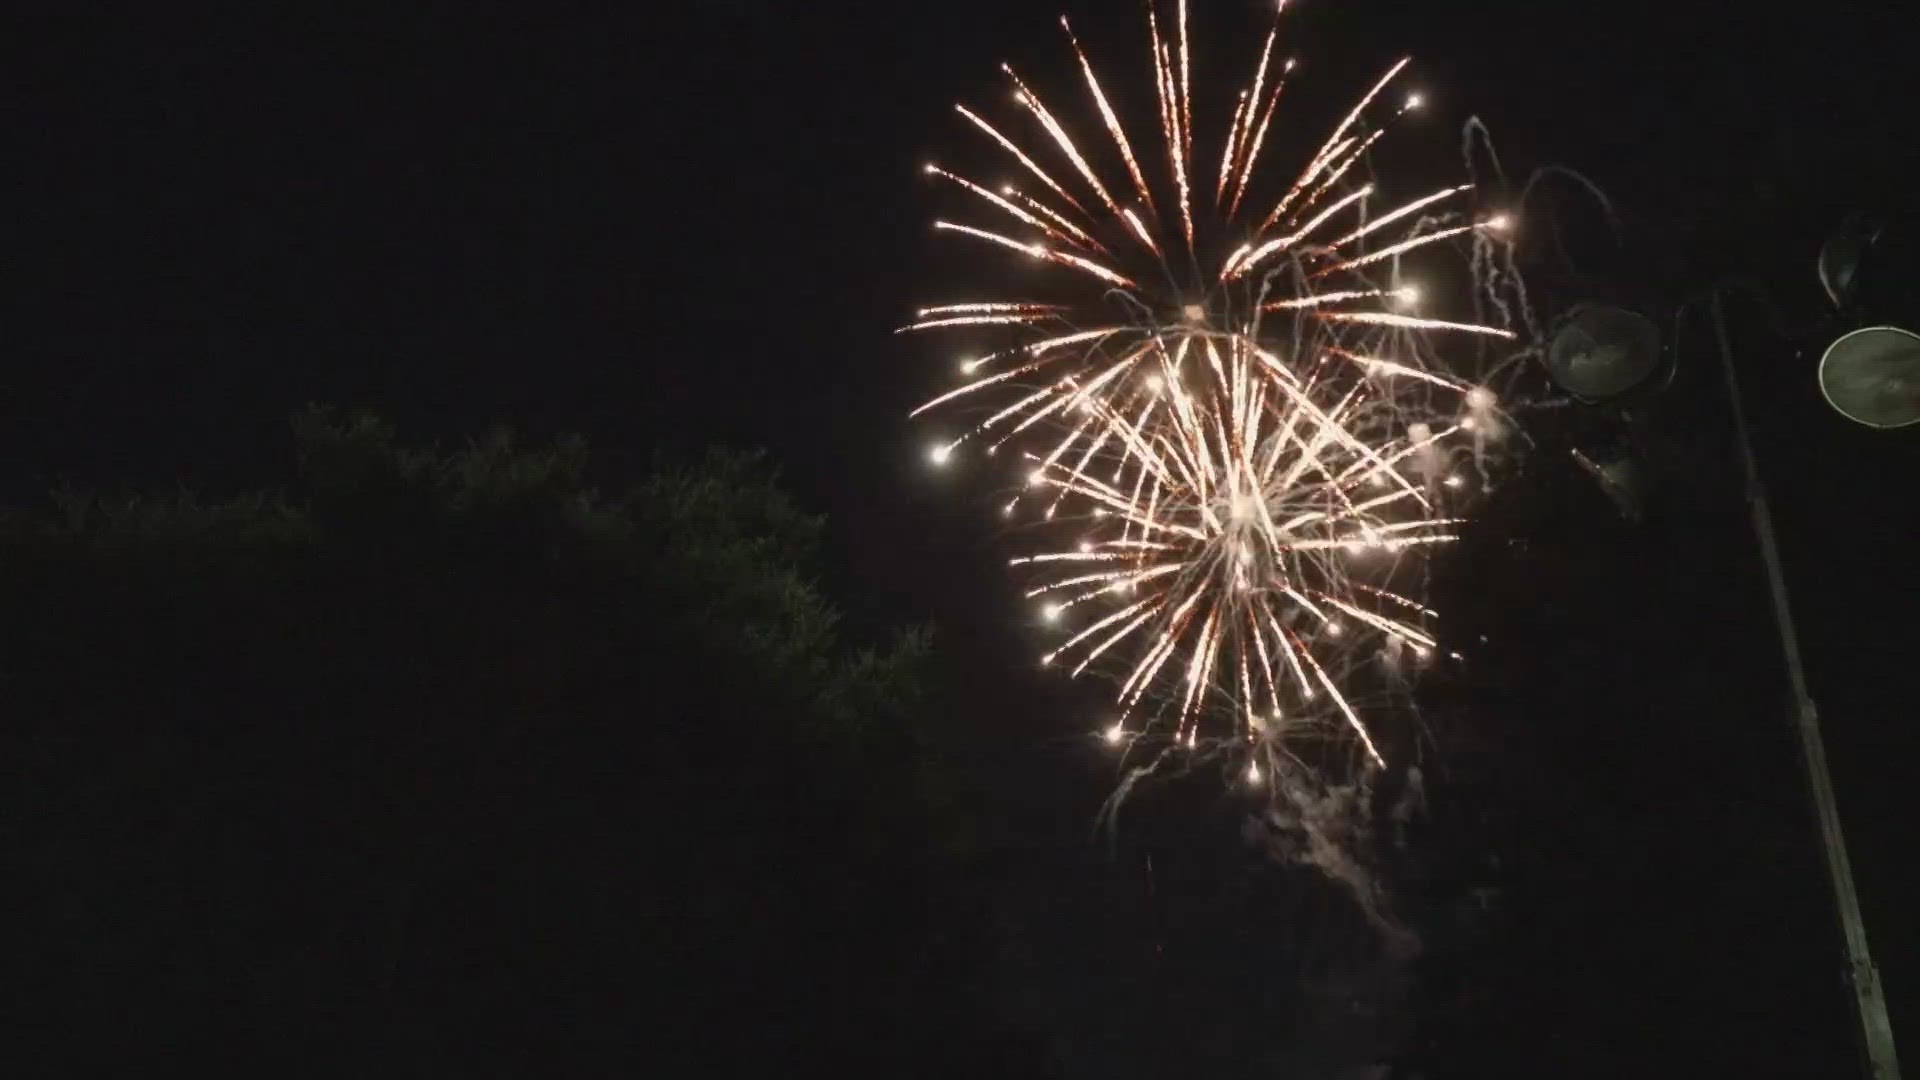 Rancho Cordova is setting off multiple rounds of fireworks for their Fourth of July Celebration.